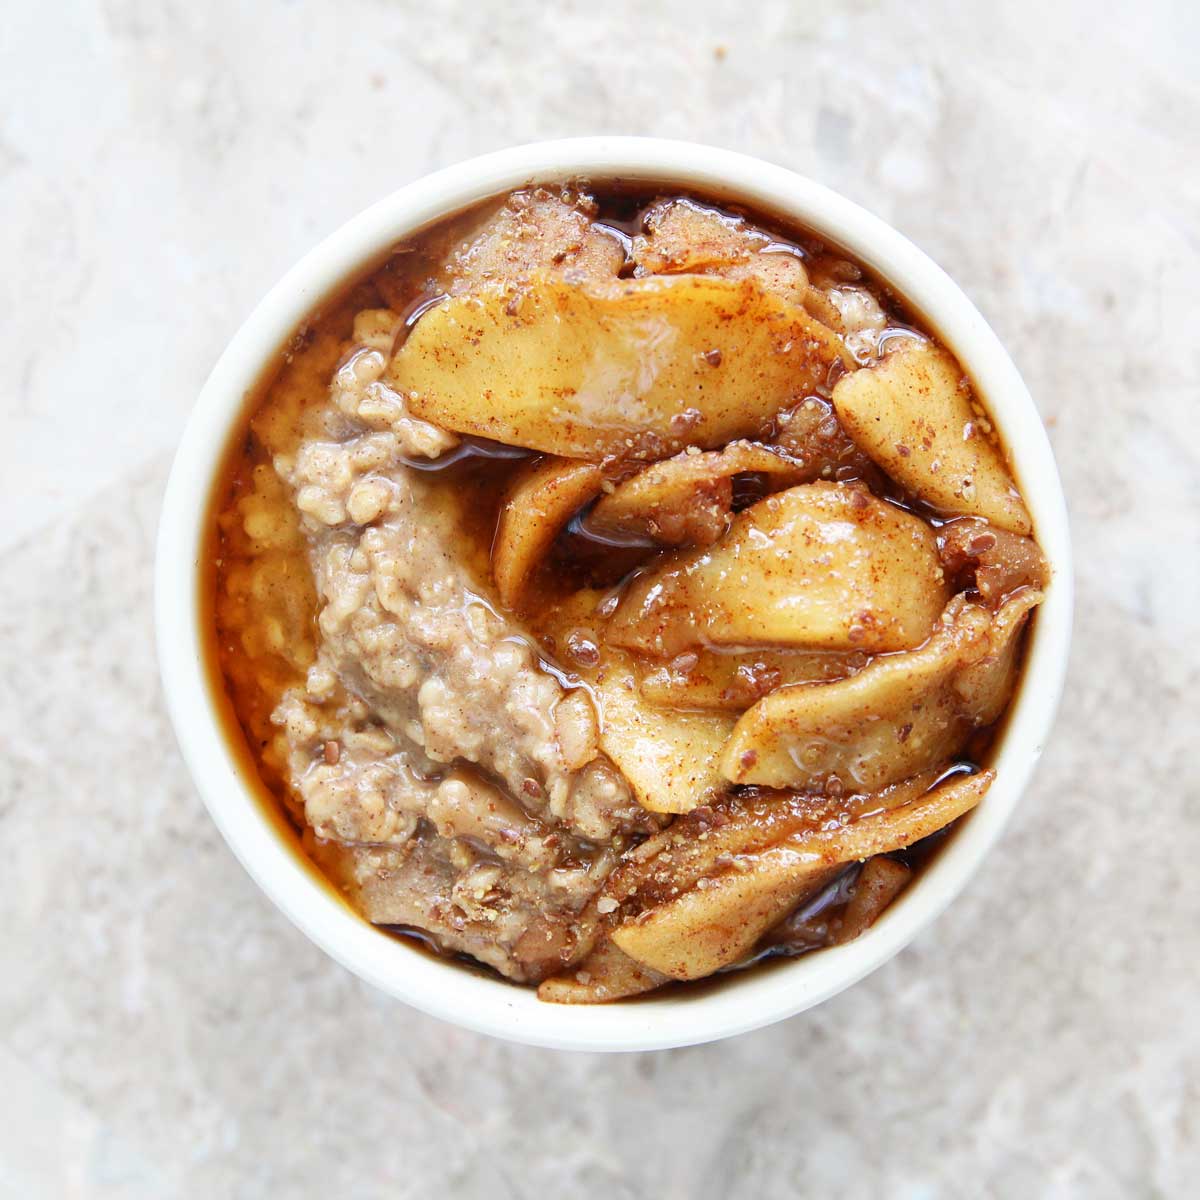 How to Make Healthy Apple Pie Oatmeal Bowl - Blueberry Banana Bread